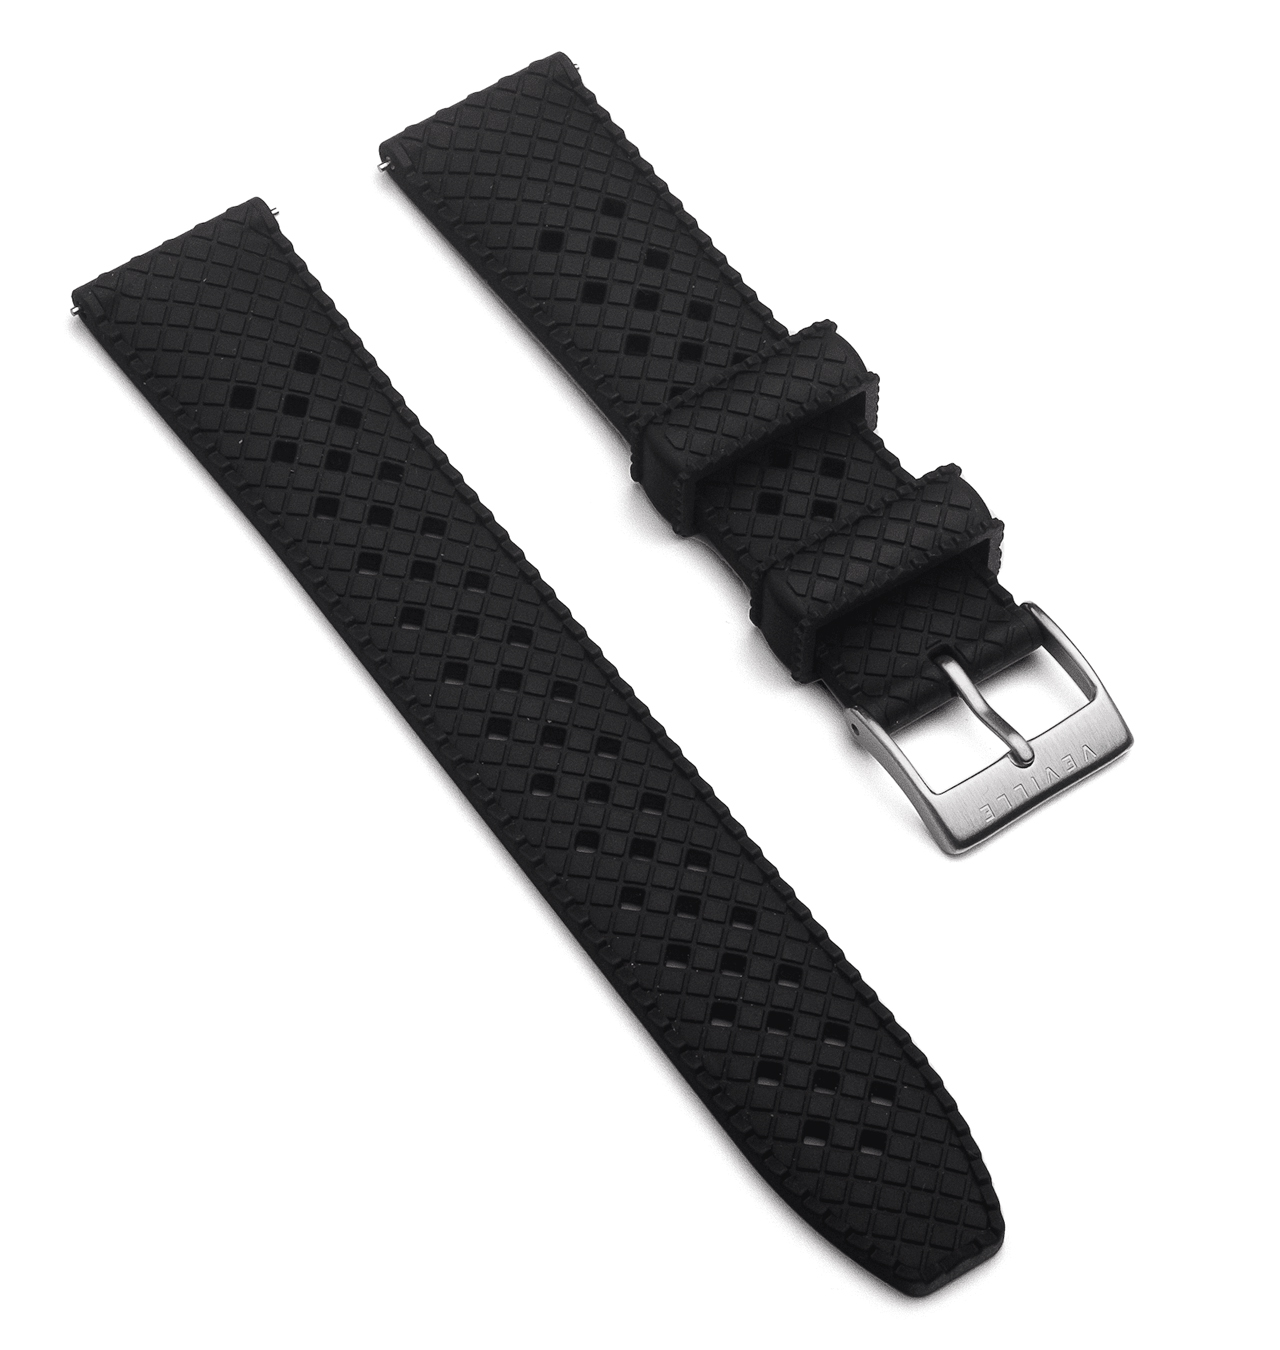 VeVille - Thunder Black Tropic Rubber Watch Band